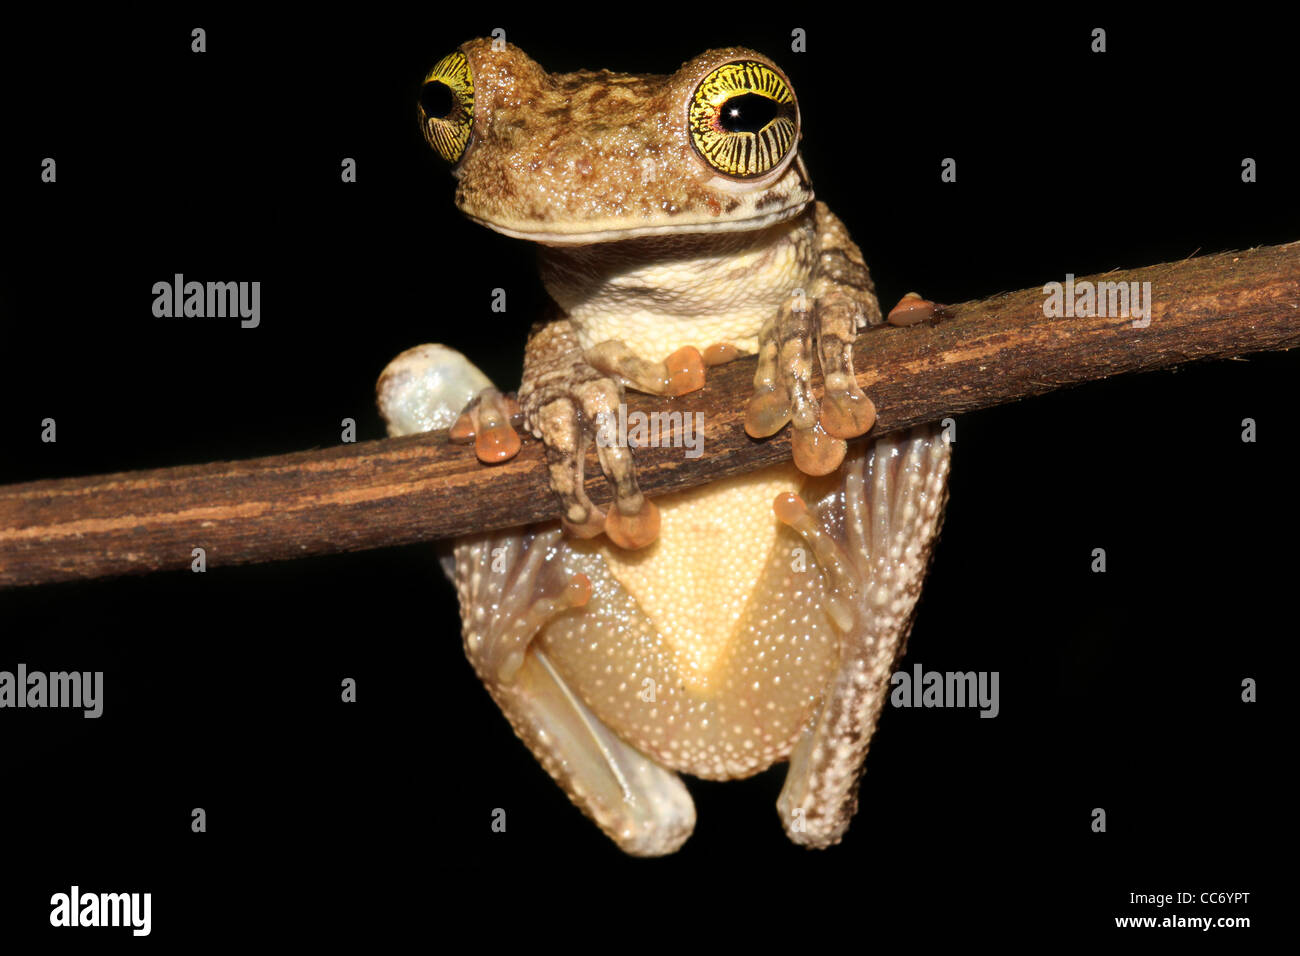 A Giant Broad-headed Treefrog (Osteocephalus taurinus) in the Peruvian Amazon Isolated on black with lspace for text Stock Photo